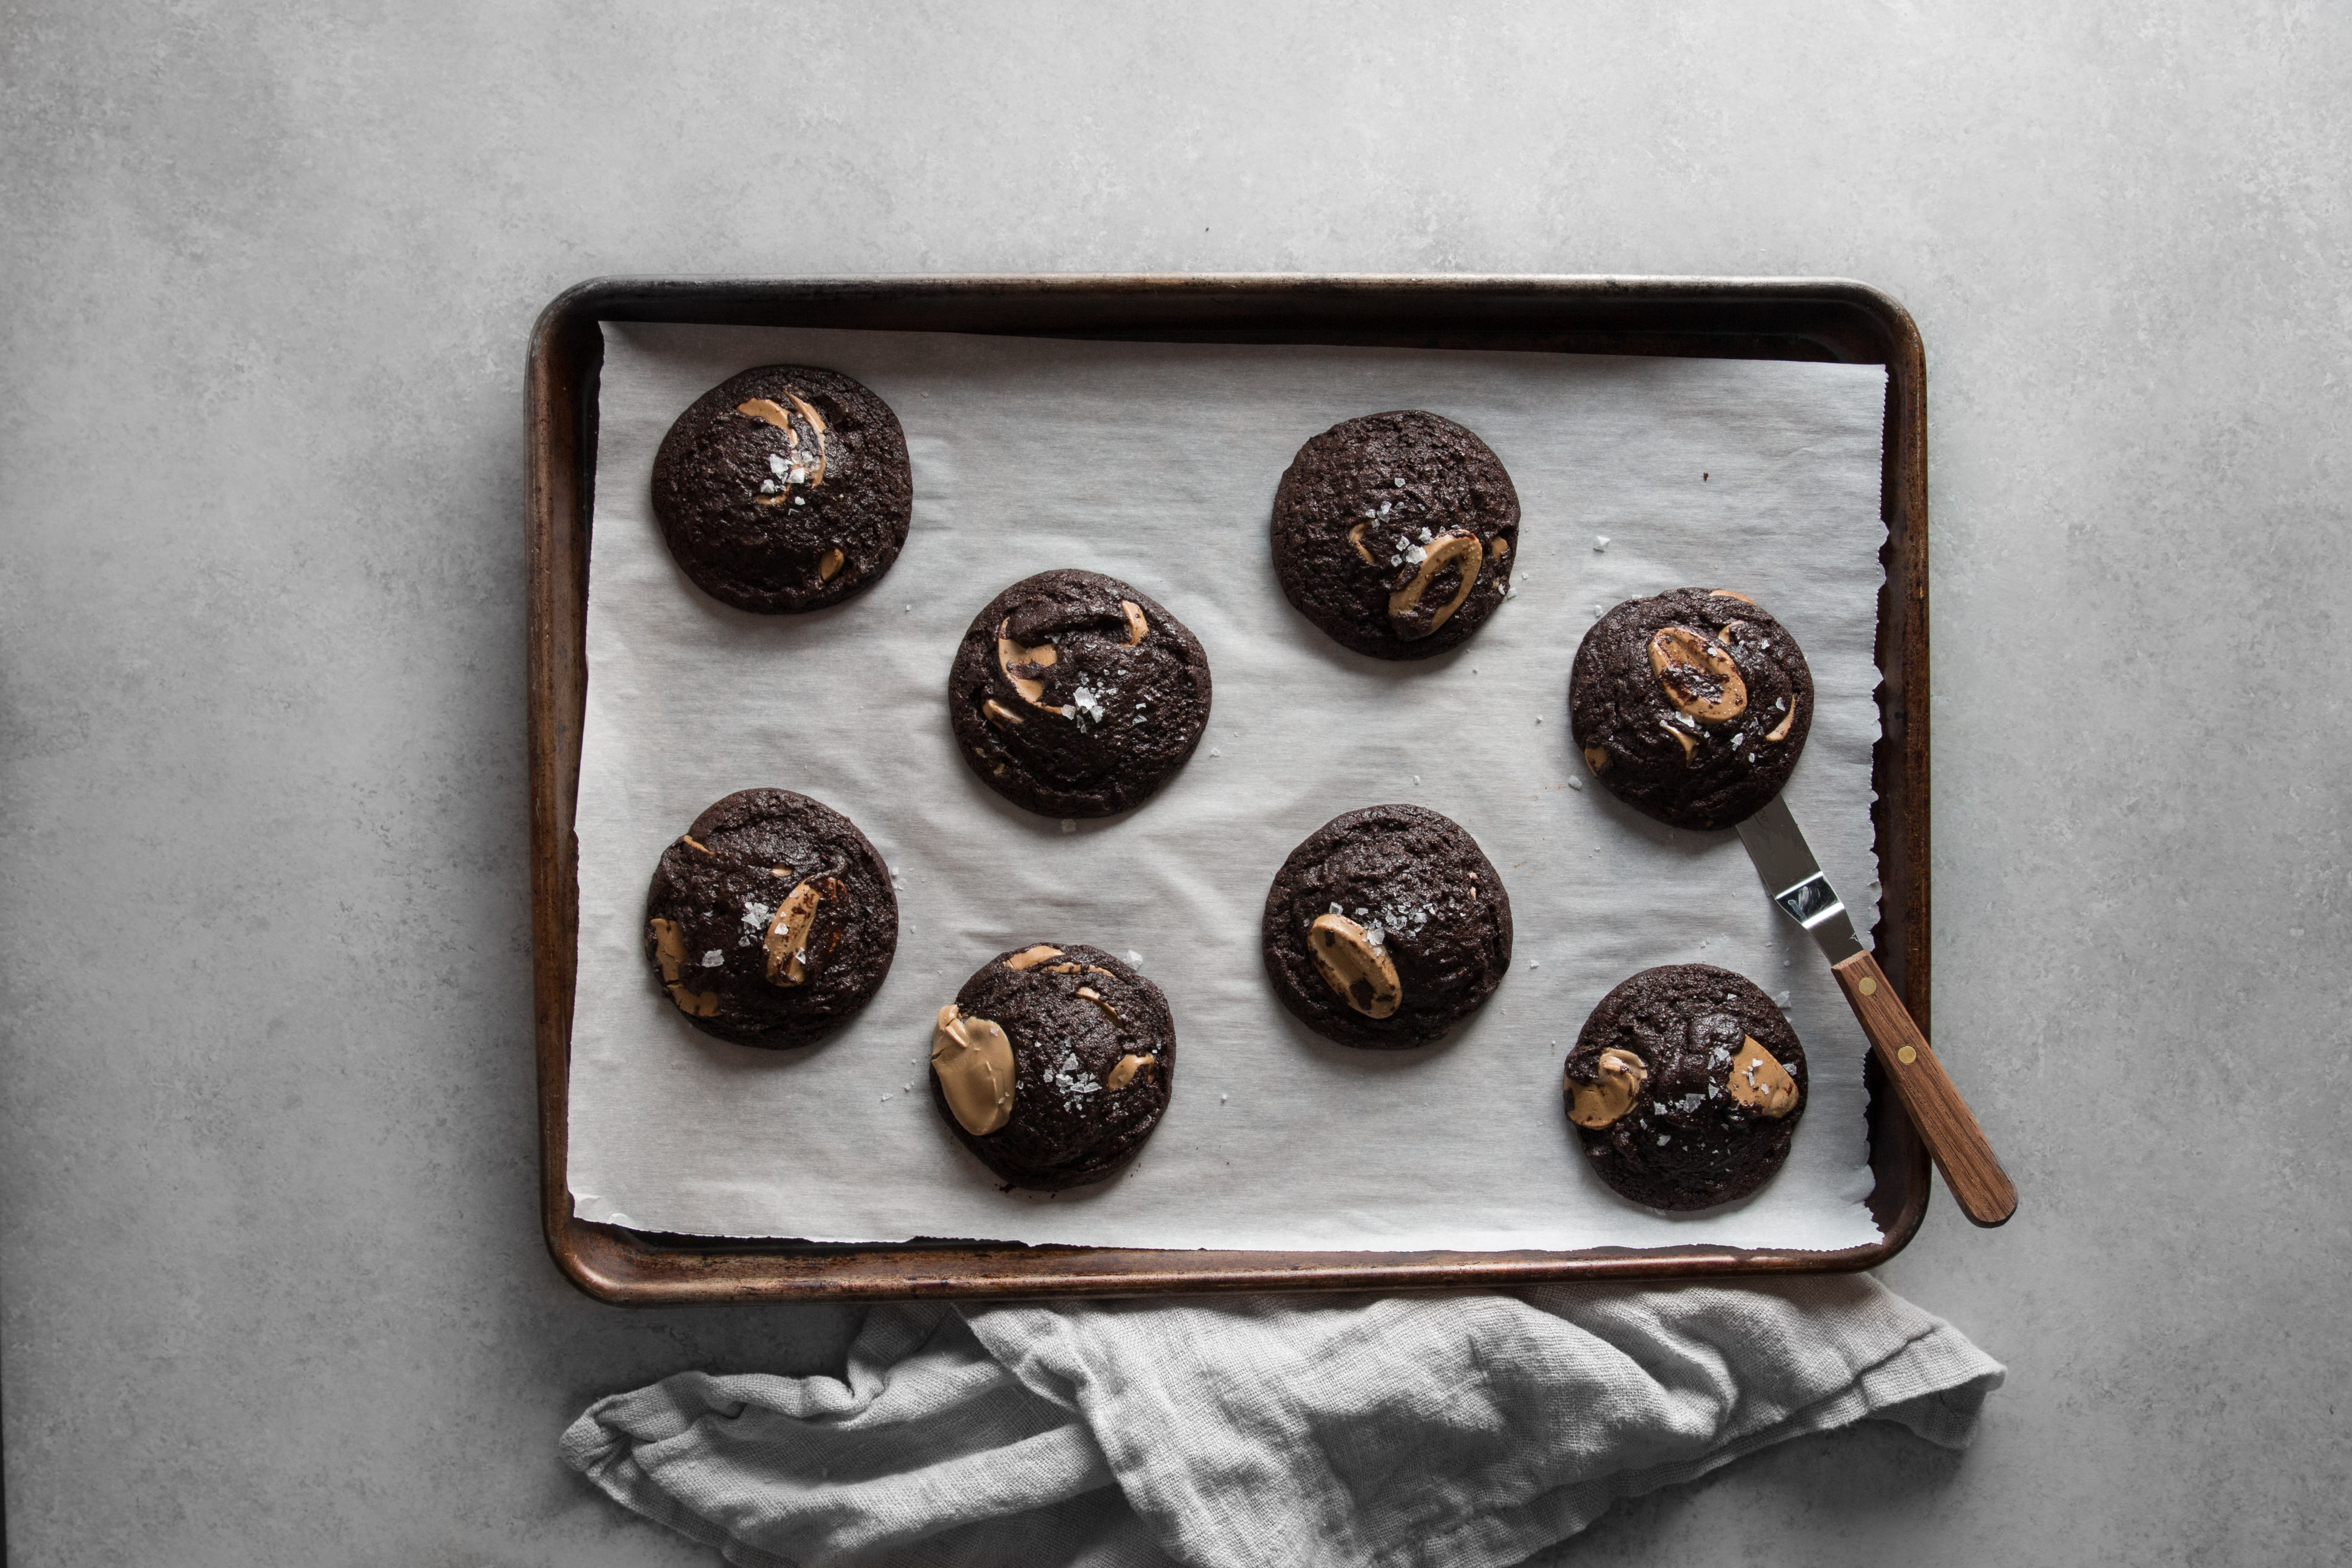 Super Dark Chocolate Cookies with Orelys Feves & Sea Salt | I Will Not Eat Oysters Recipe